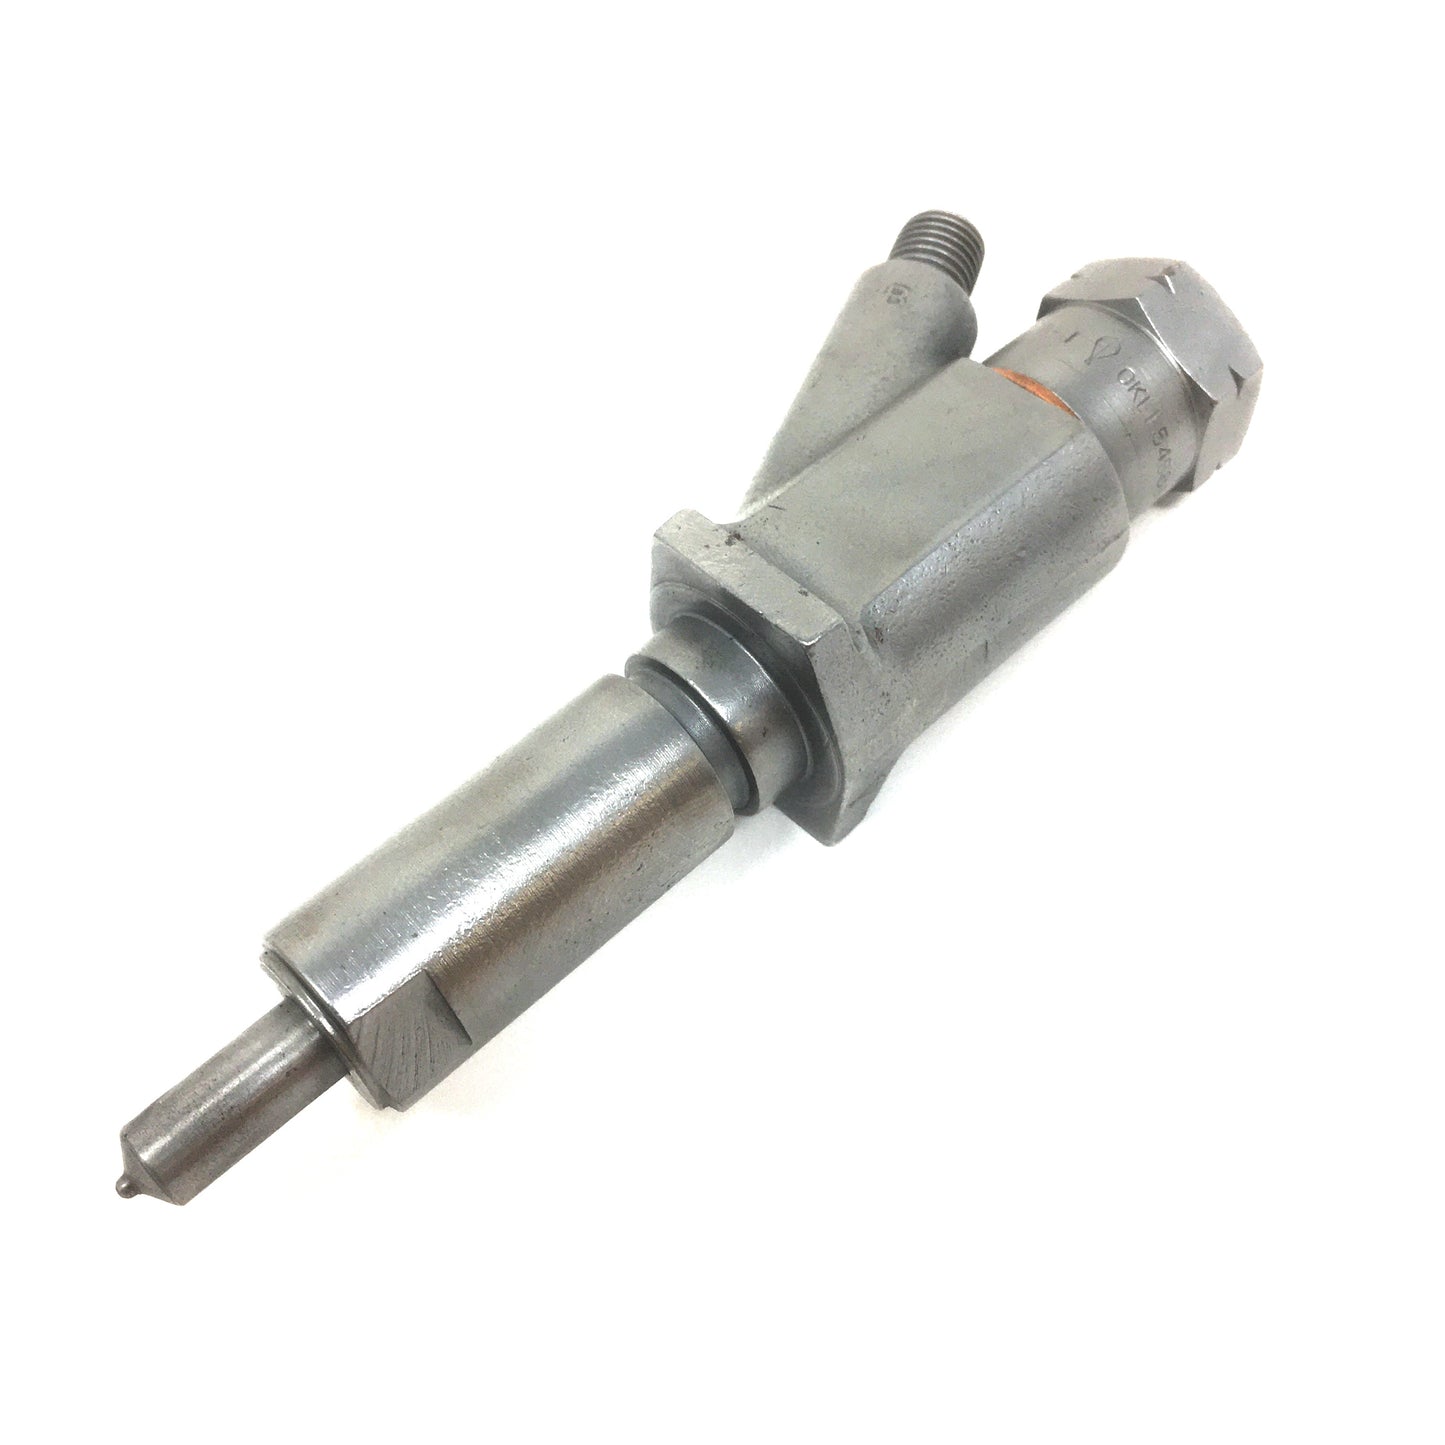 Fuel Injector for Massey Fergusson 2745 (1447473)